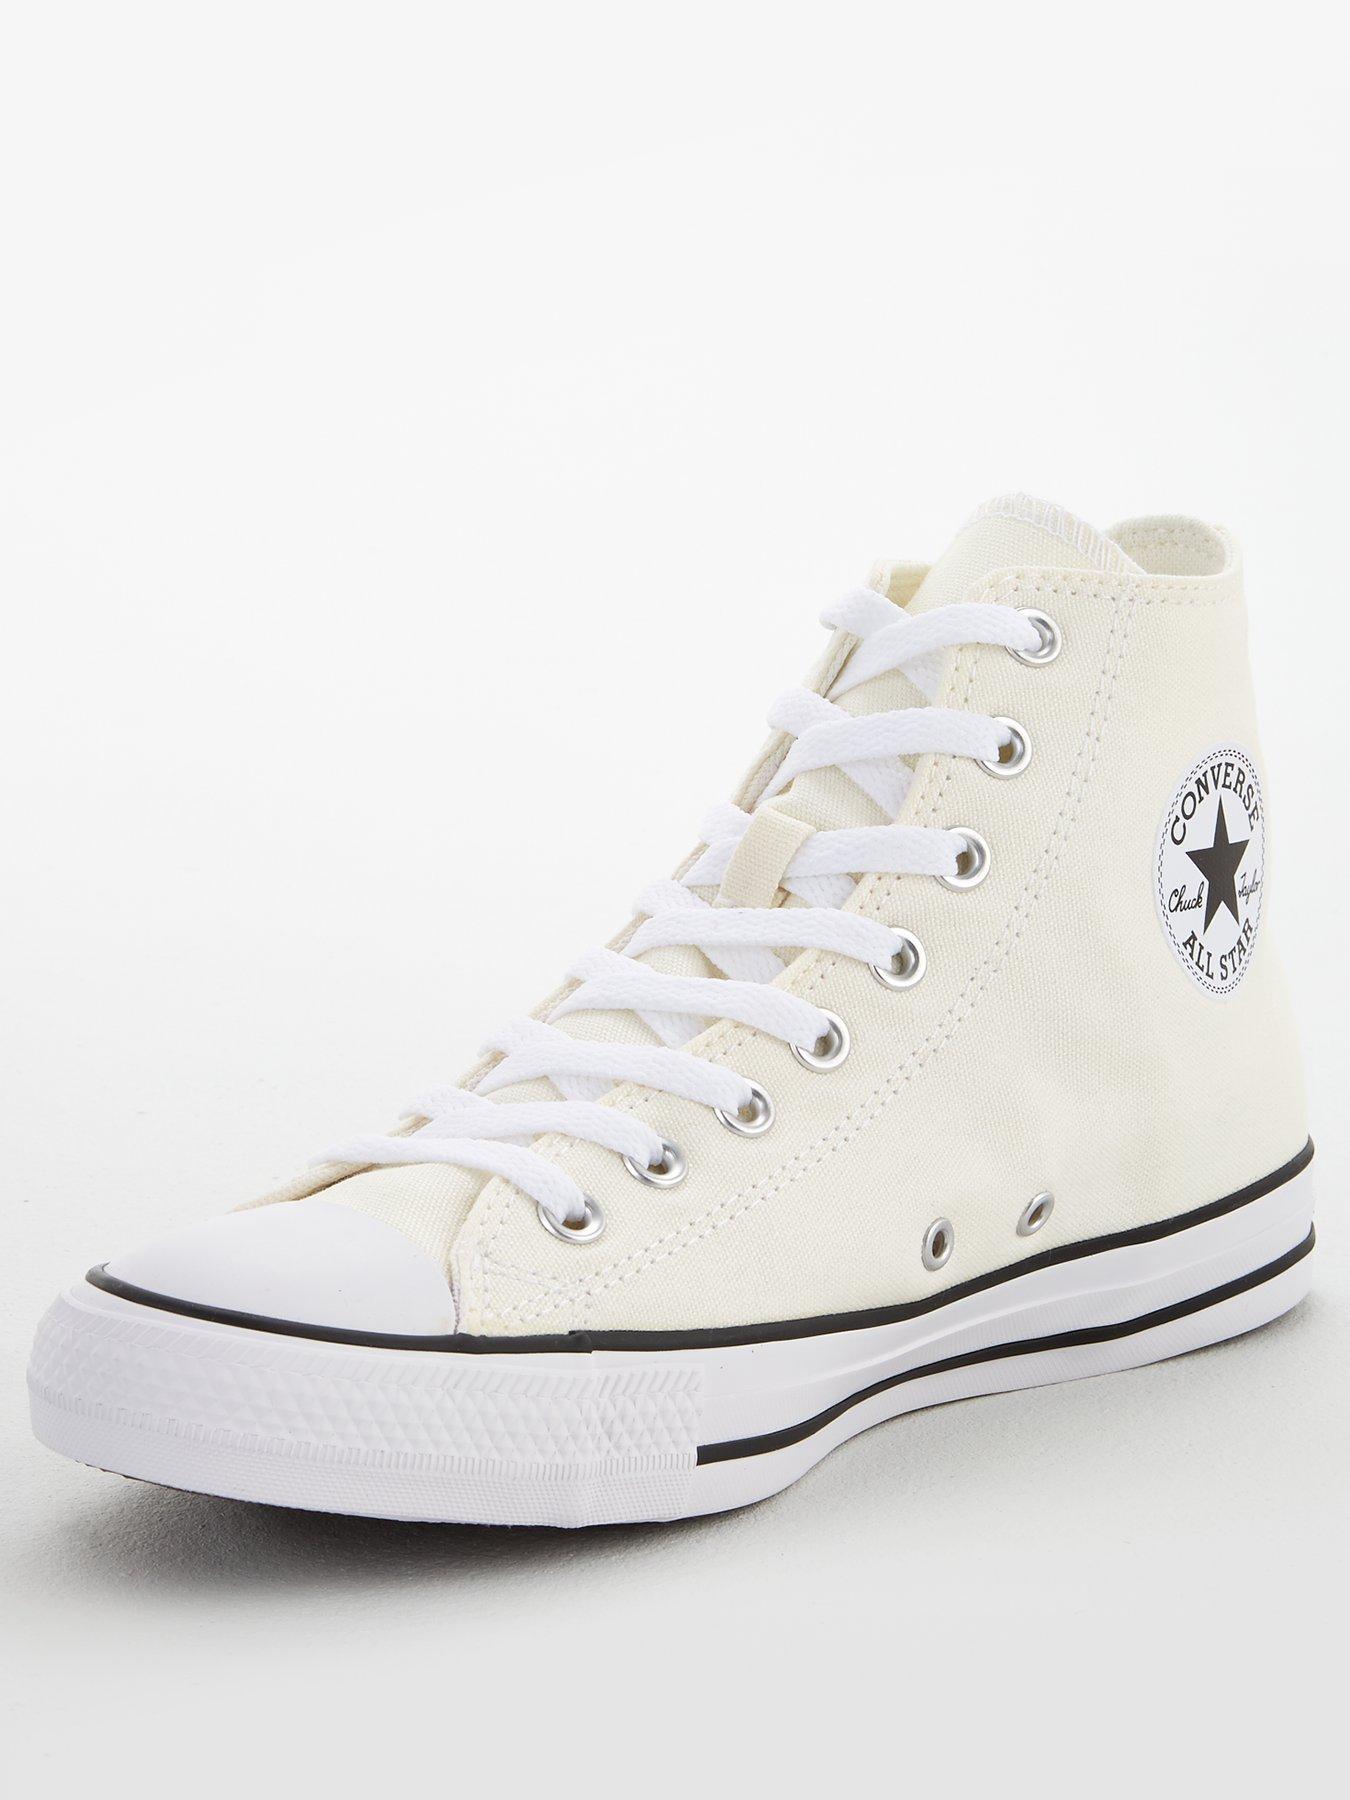 converse clearance 192